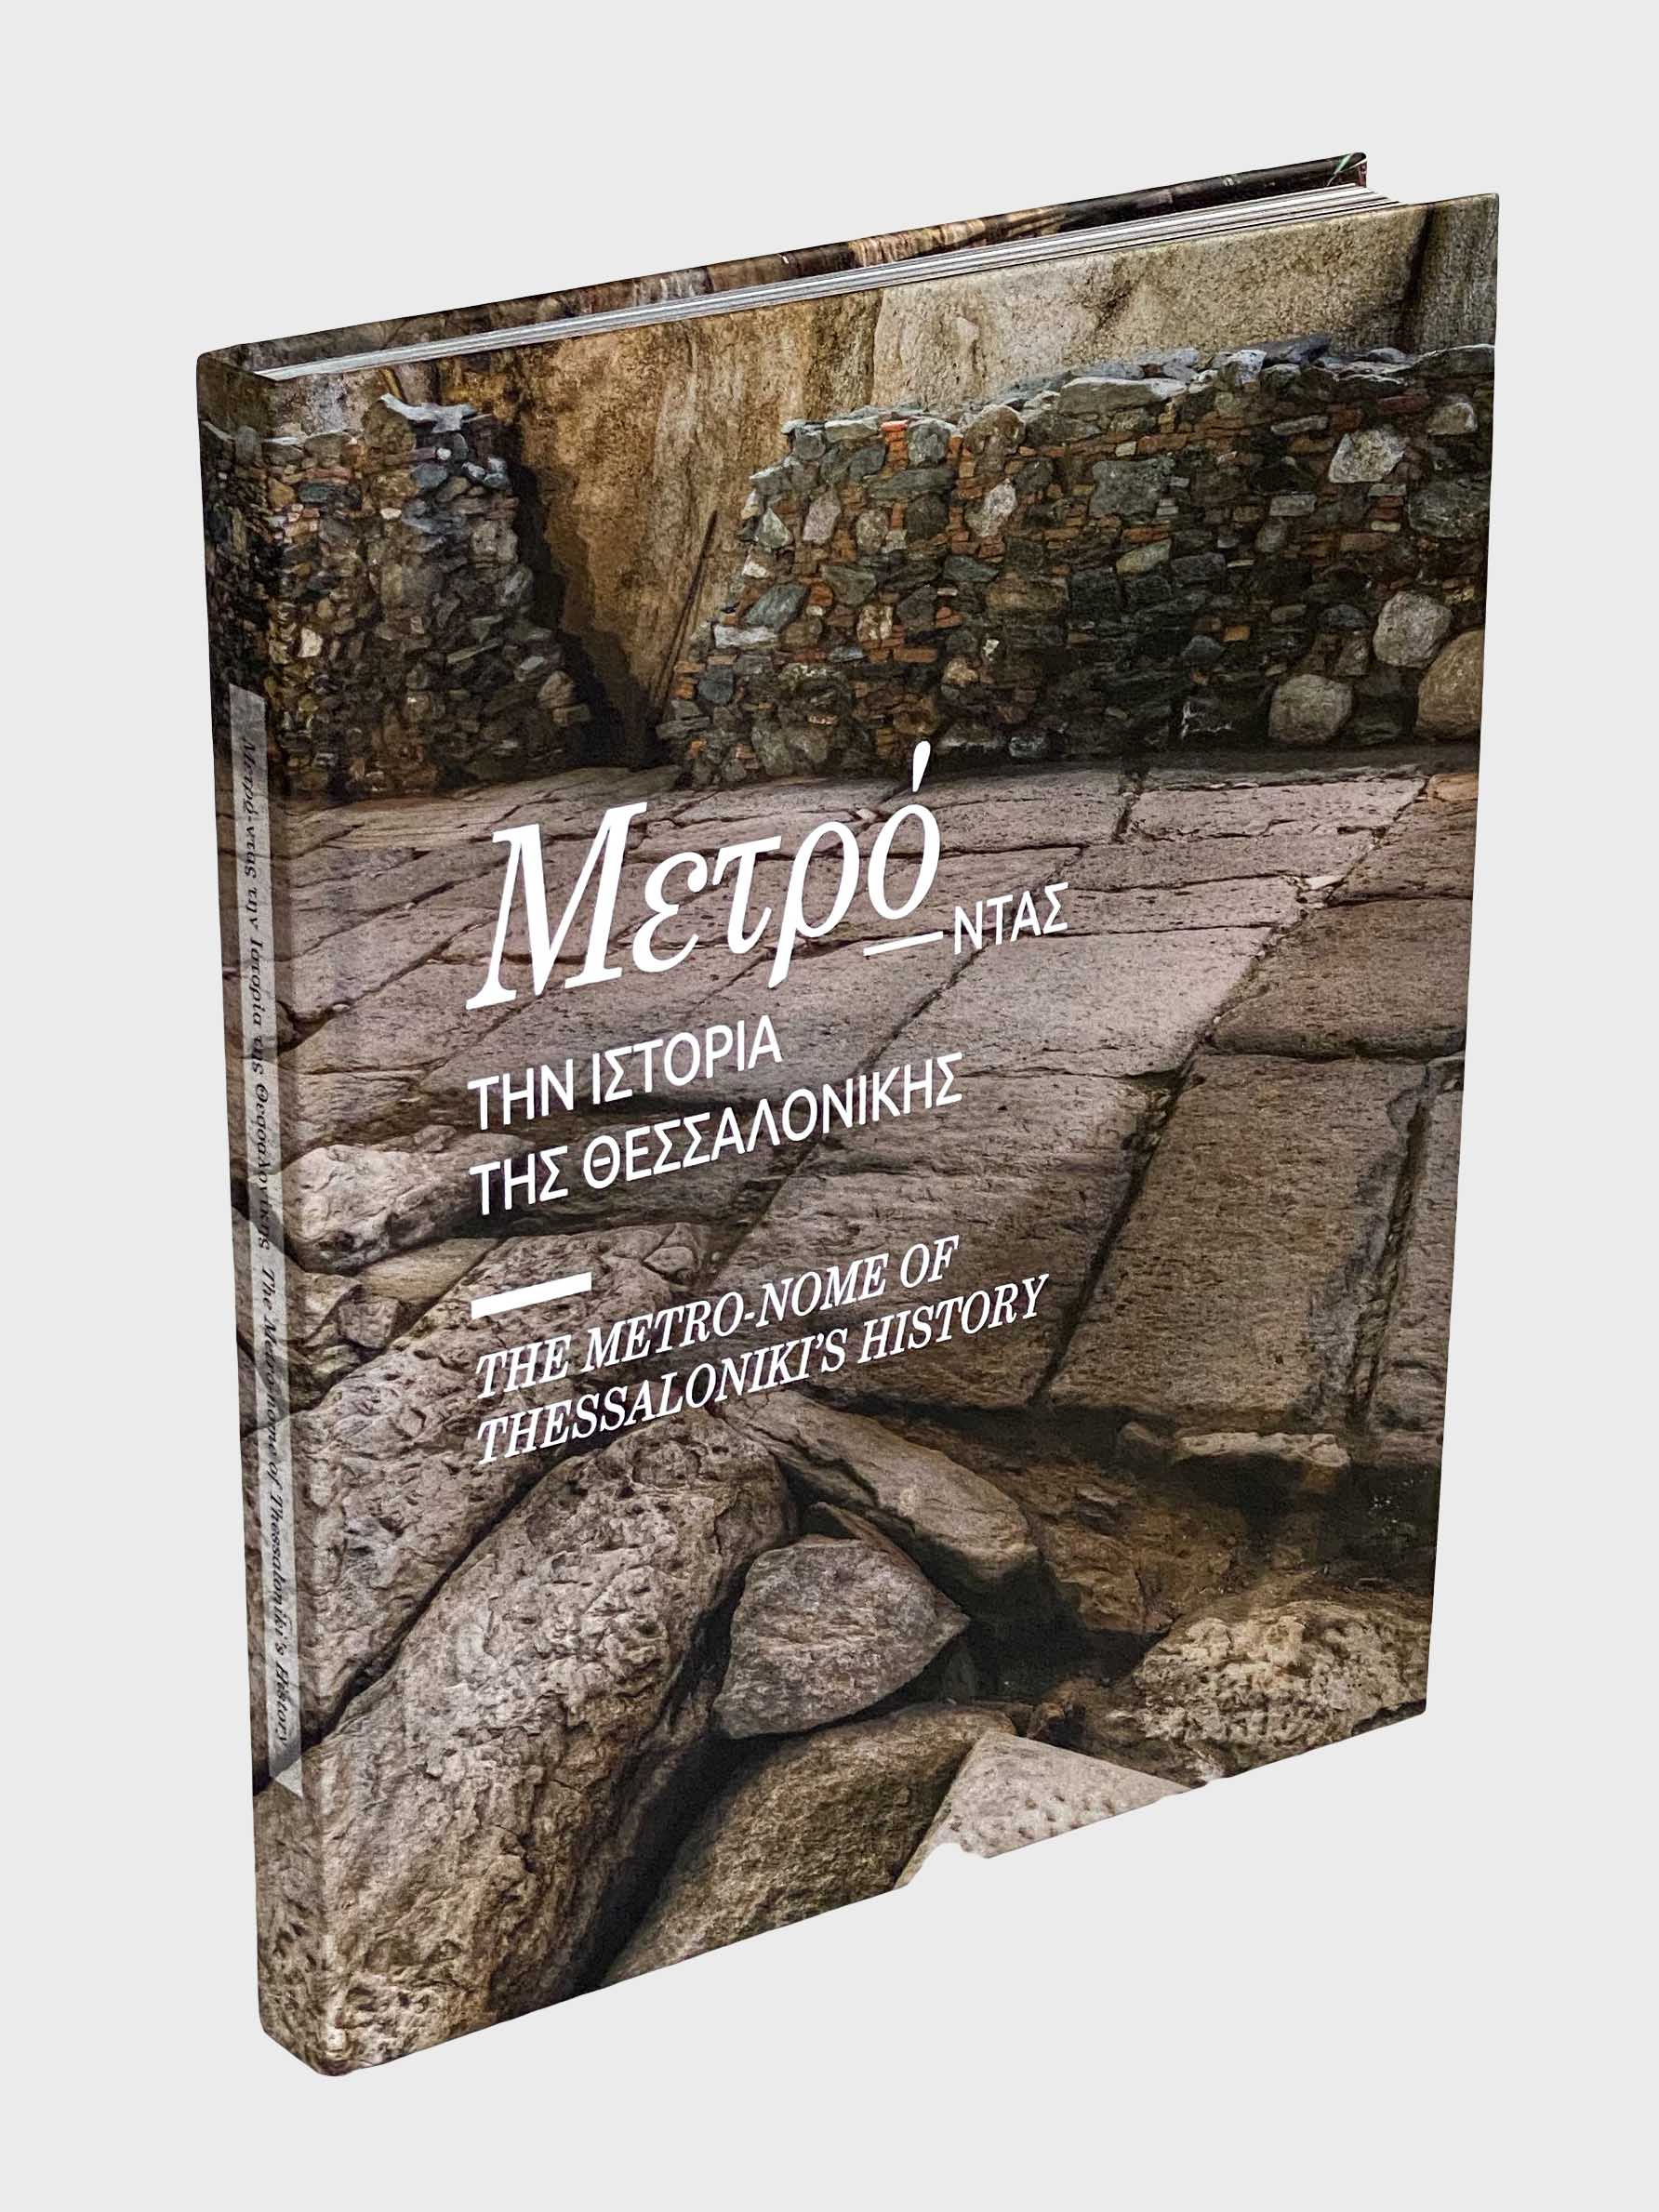 Photo album for Thessaloniki Metro - The Metro-nome of Thessaloniki’s History. Adam-Veleni, P.,  Mylopoulos, G. (eds.). Ministry of Infrastructure and Transport, Ministry of Culture and Tourism, Thessaloniki 2018 (ISBN 978-960-86610-9-7). Bilingual edition (English / Greek). 